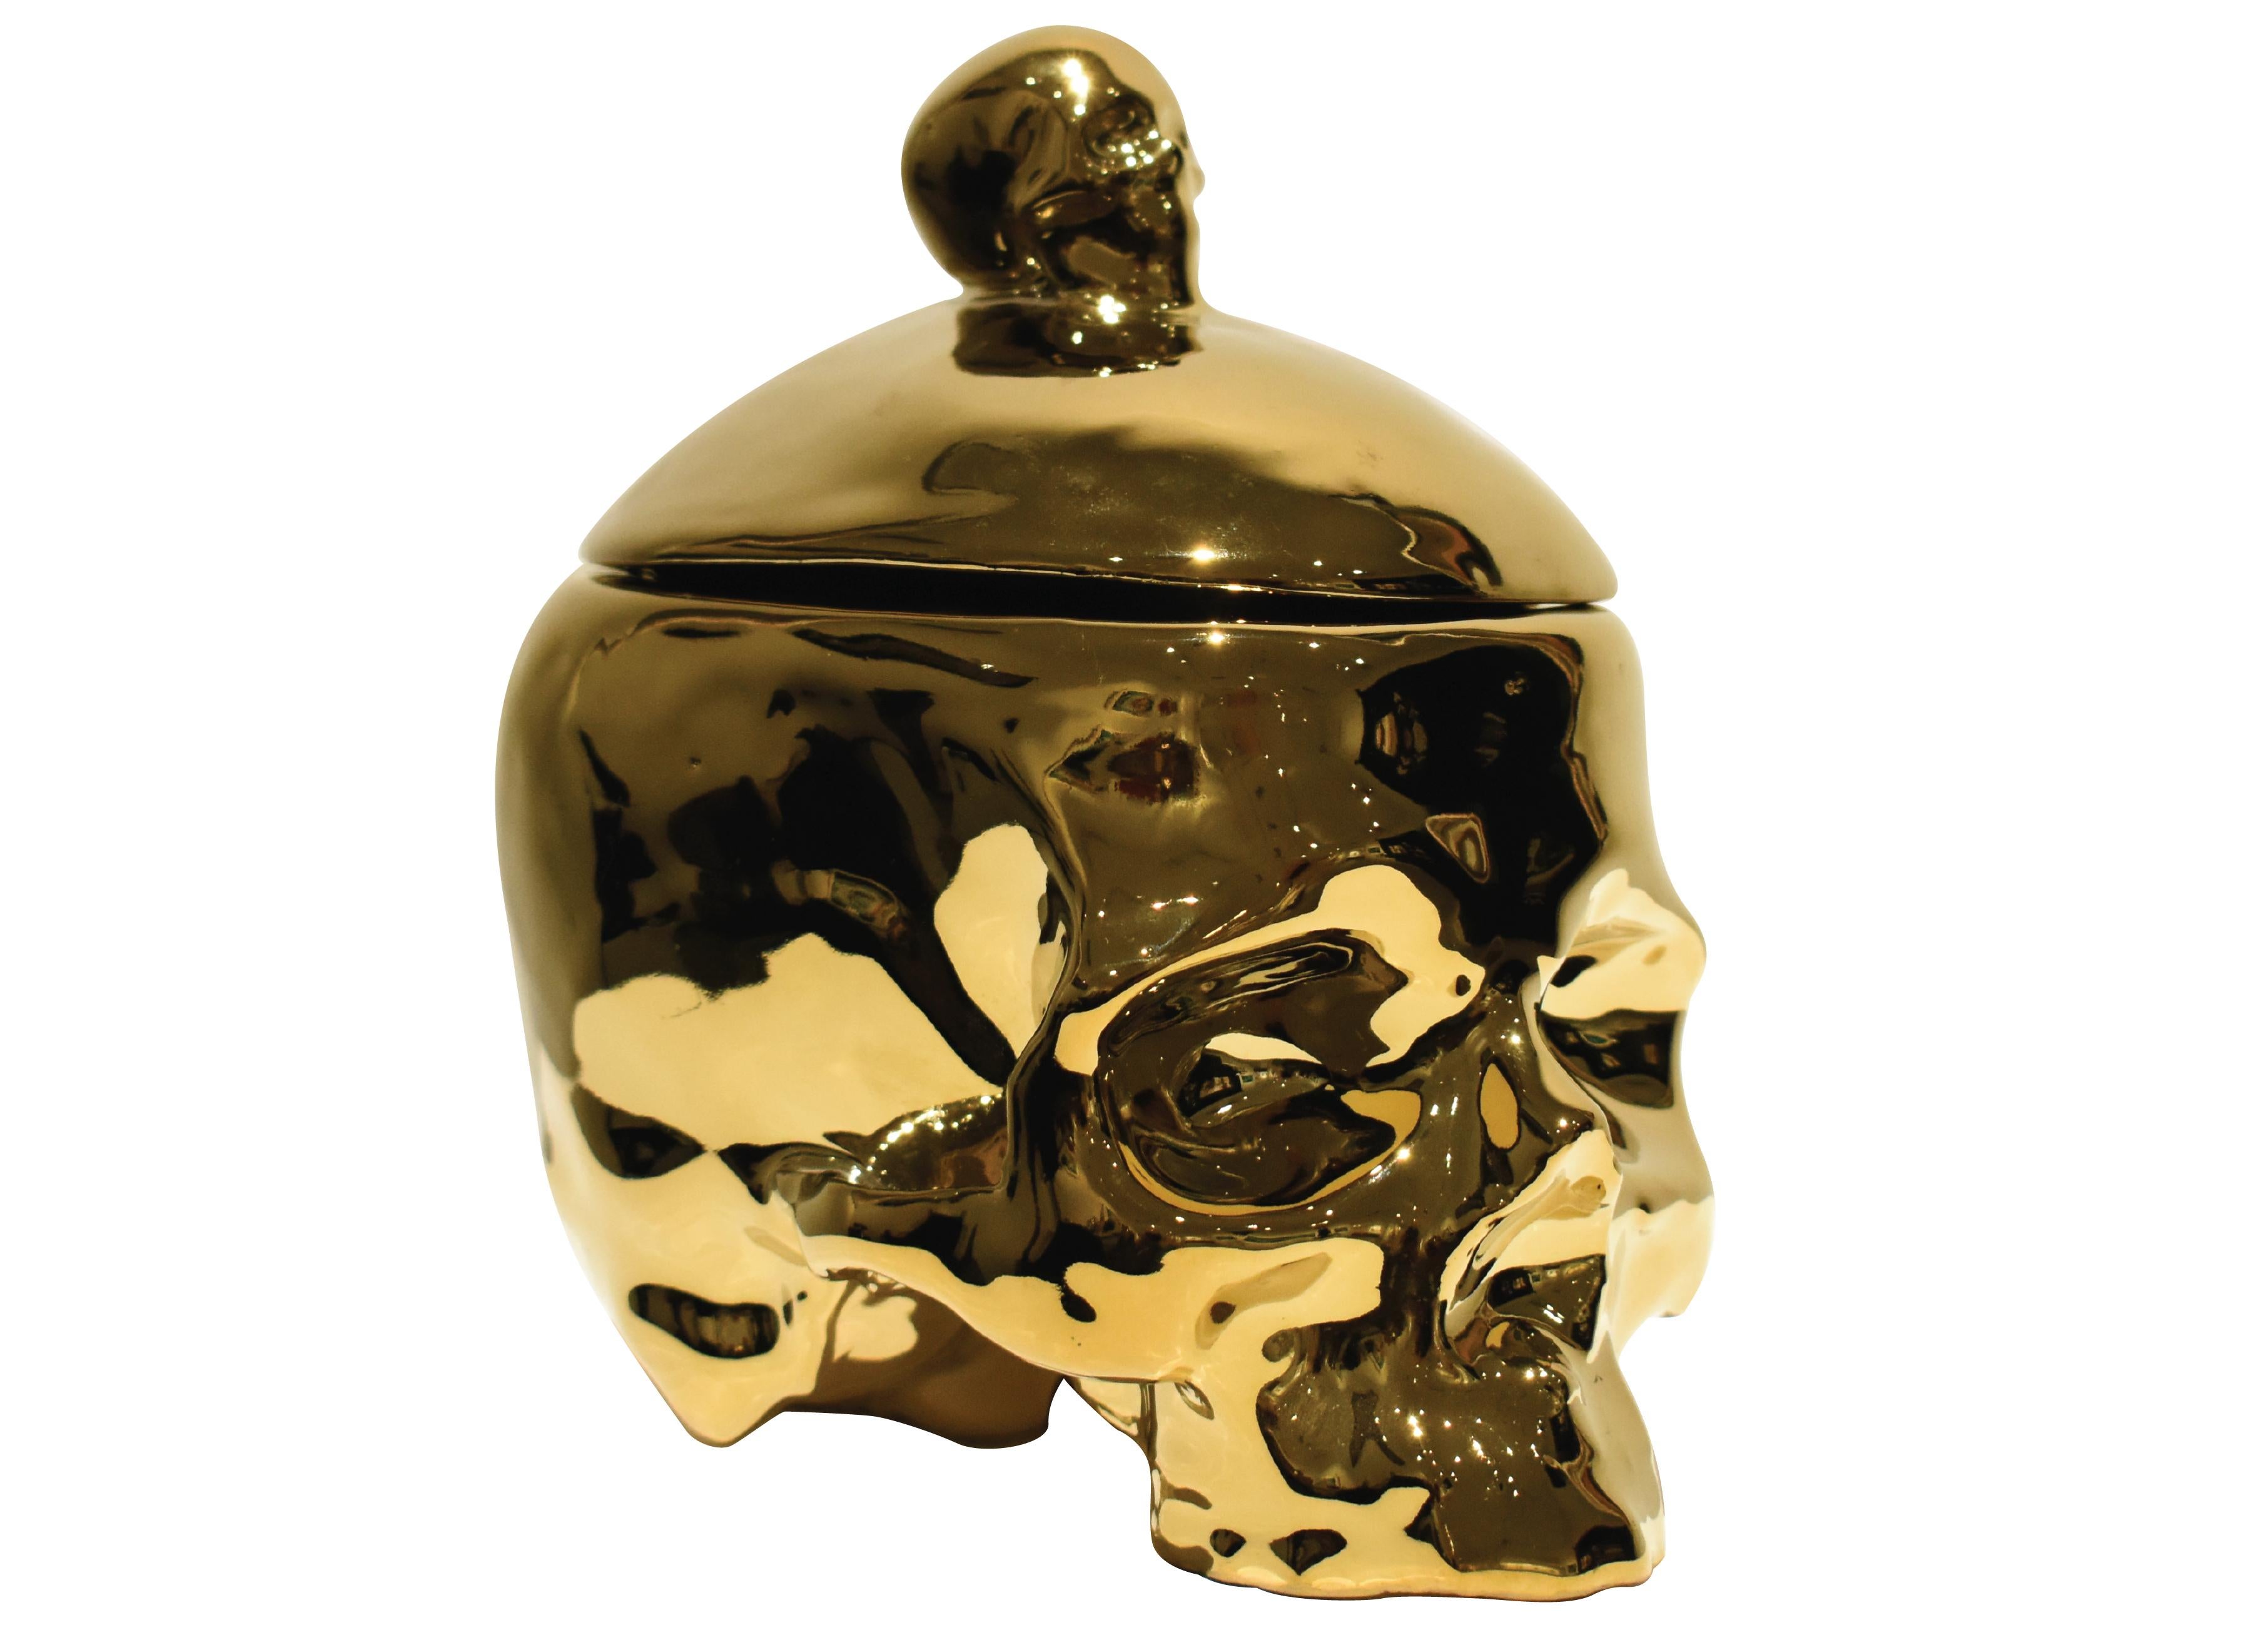 Huang Yulong Figurative Sculpture - Porcelain Sculpture With Skull Shape In Gold Color, Removable Cover